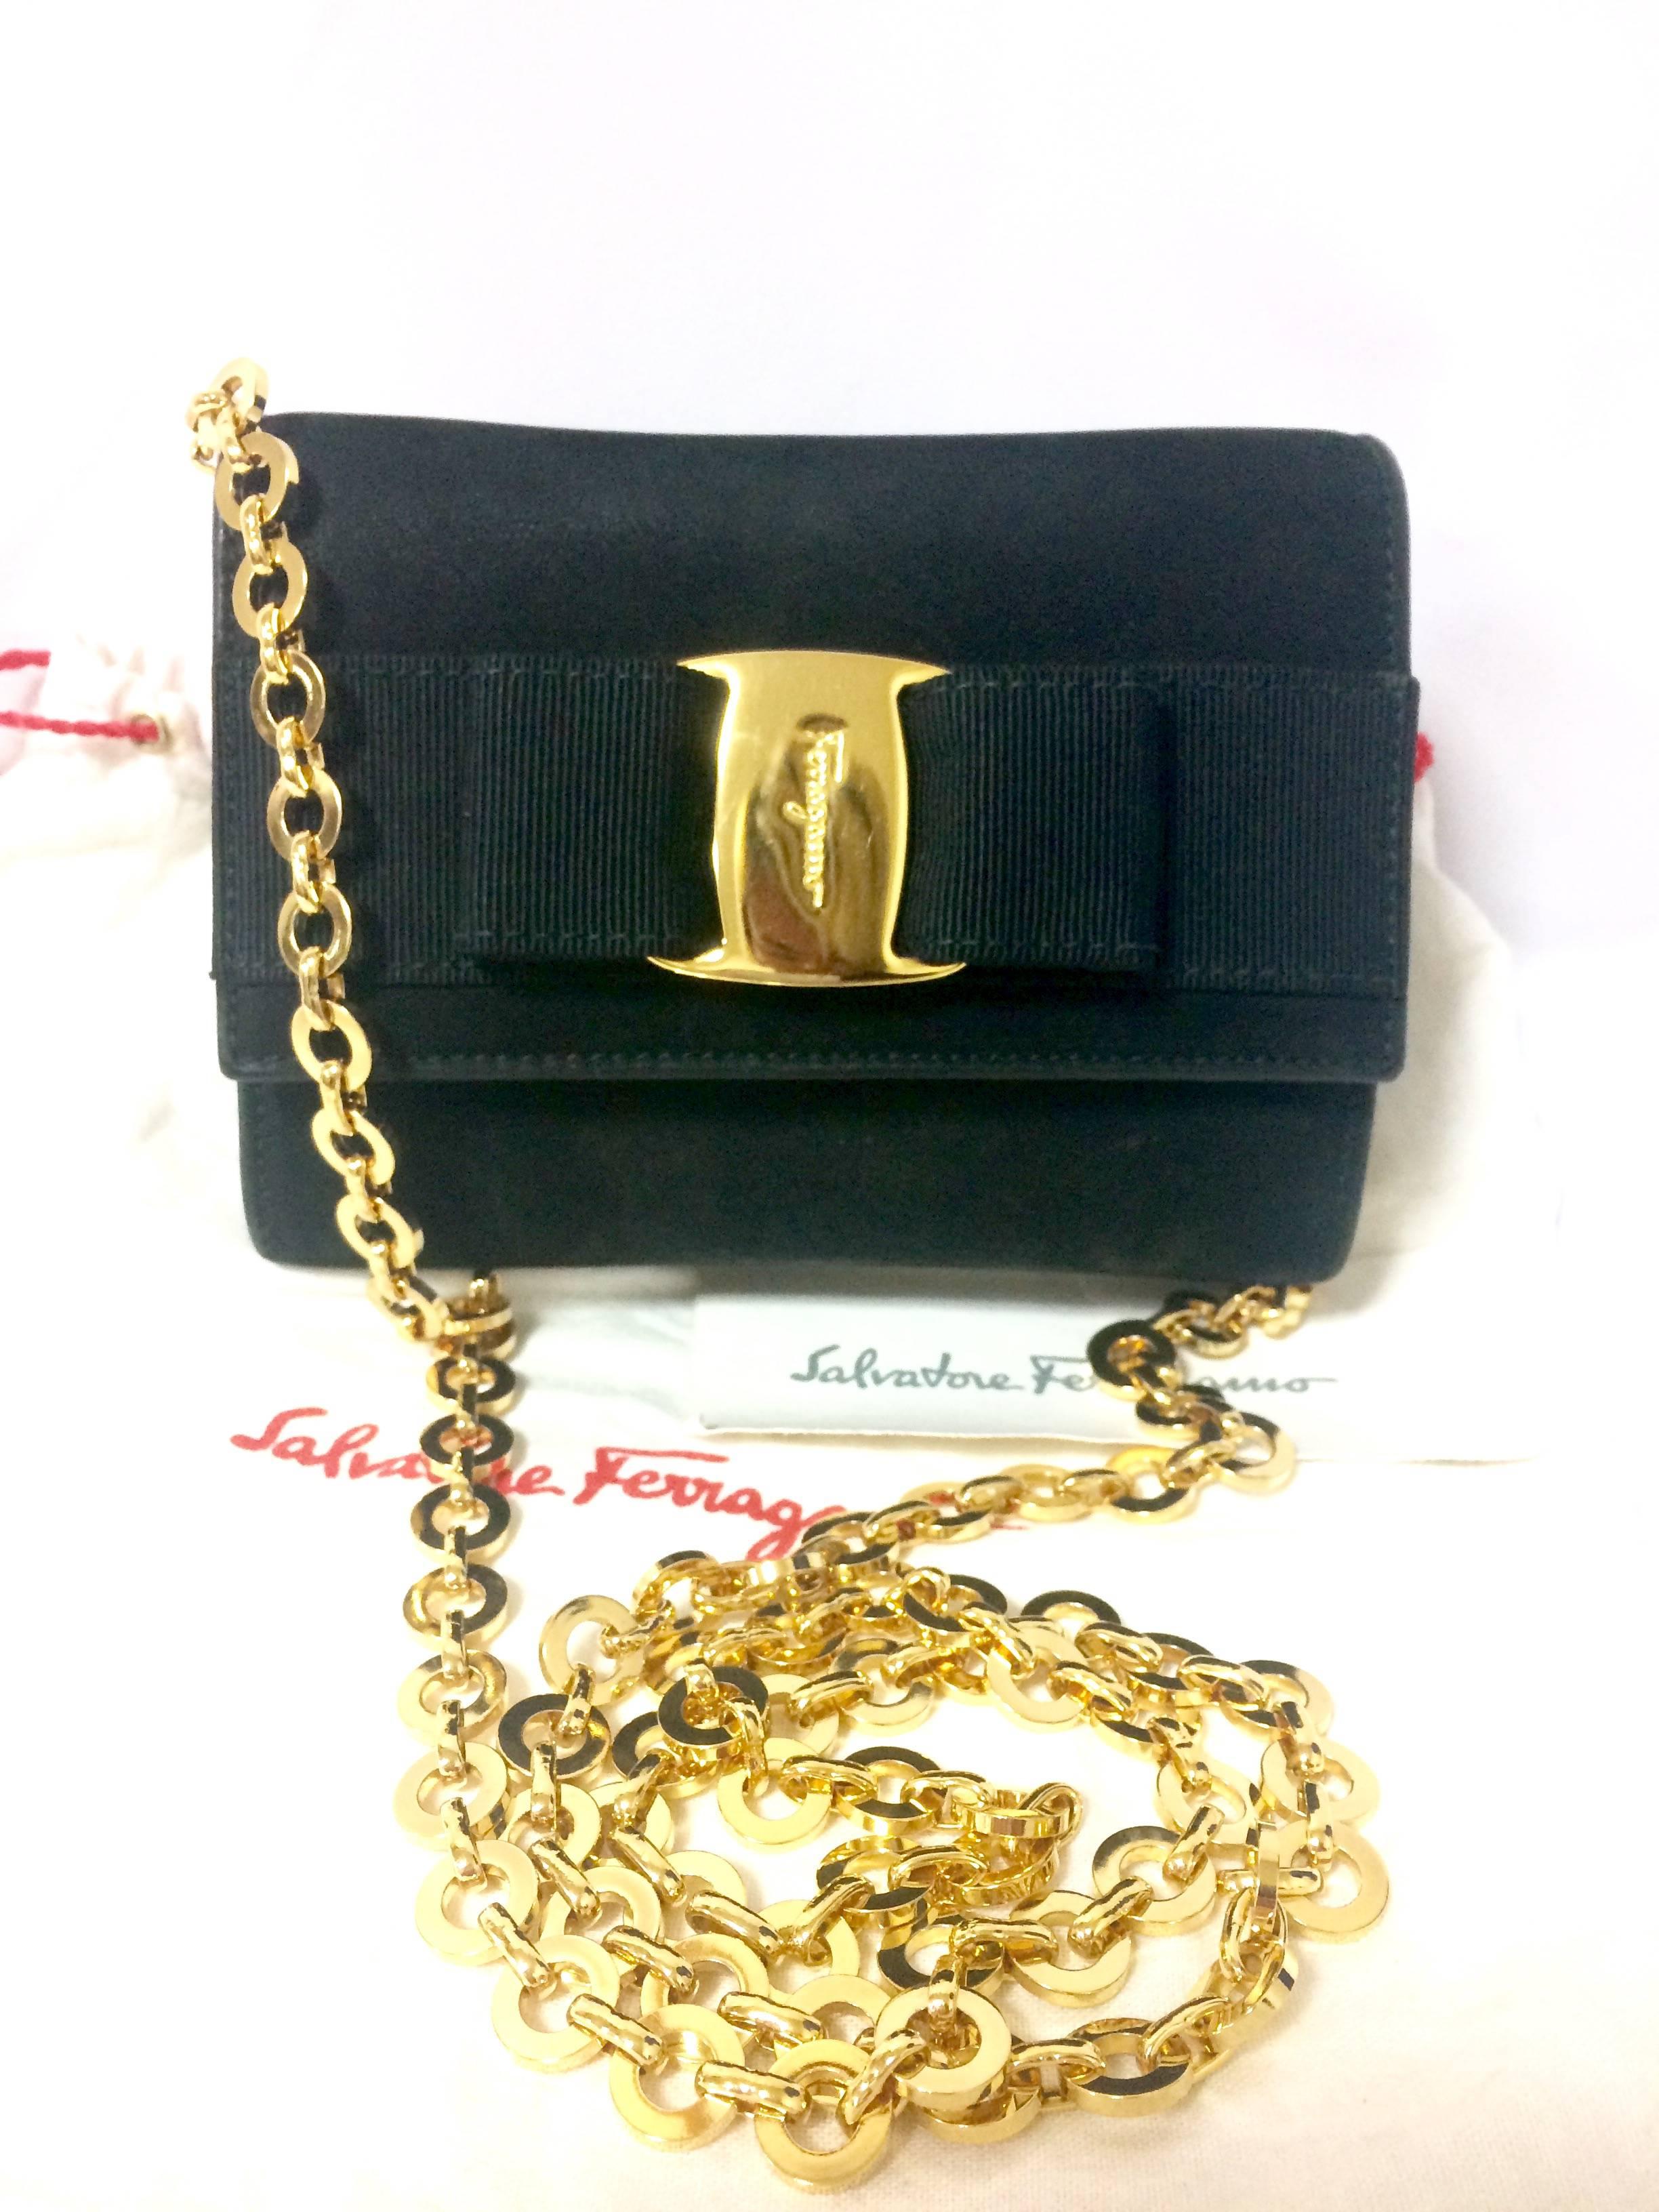 Vintage Salvatore Ferragamo black shoulder mini bag with gold chain and Vara bow For Sale 2